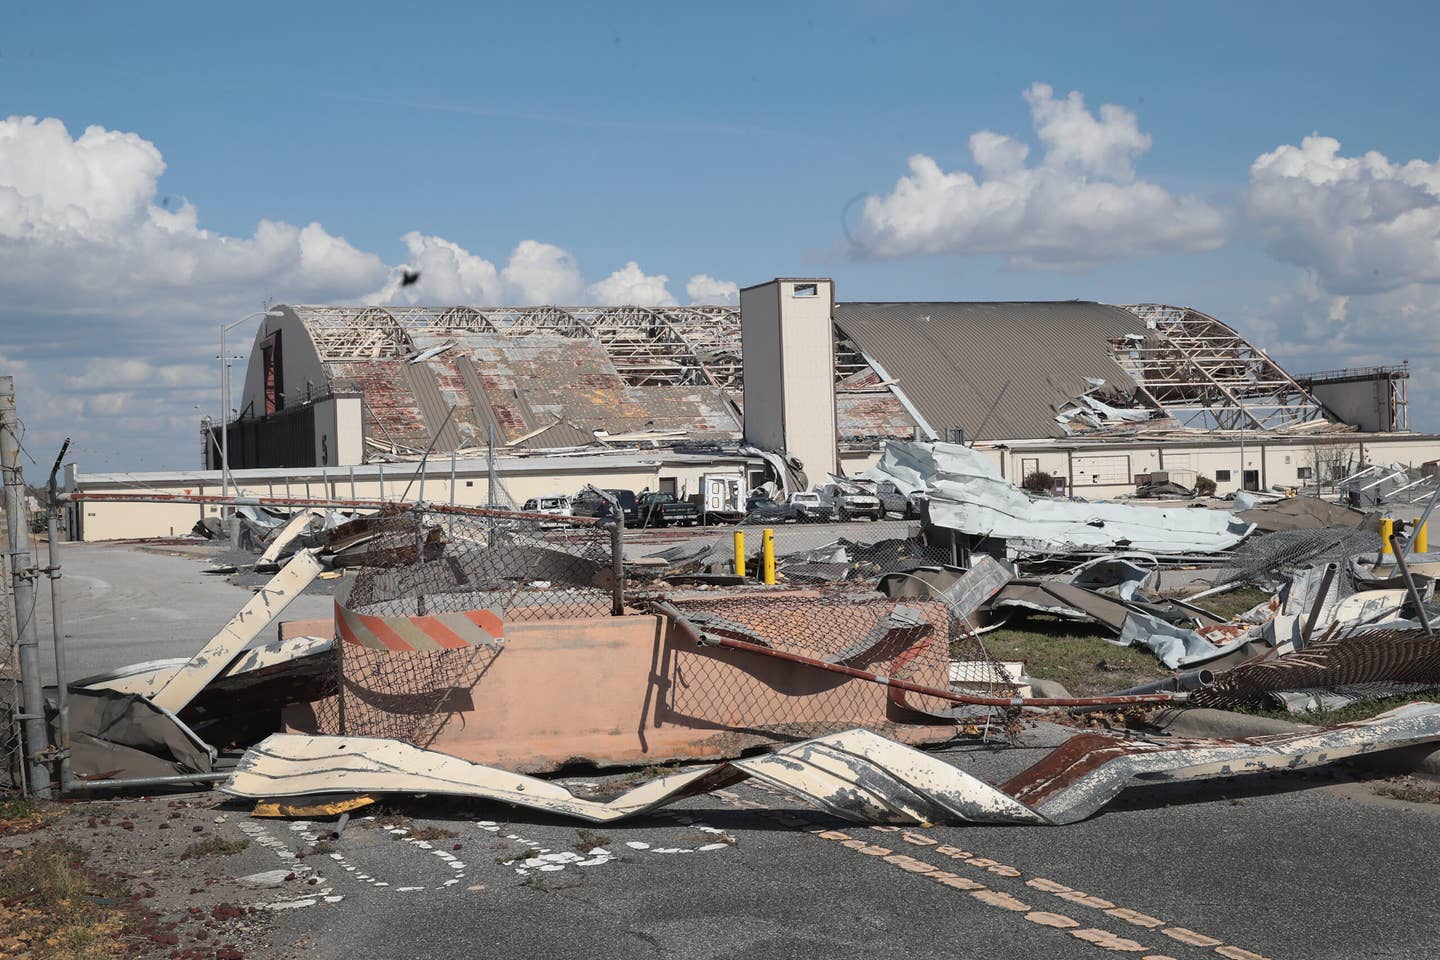 Debris litters Tyndall Air Force Base following Hurricane Michael on October 17, 2018 in Panama City, Florida. the base experienced extensive damage from the storm. Hurricane Michael slammed into the Florida Panhandle on October 10, as a category 4 storm causing massive damage and claiming nearly 30  lives.  (Photo by Scott Olson/Getty Images)